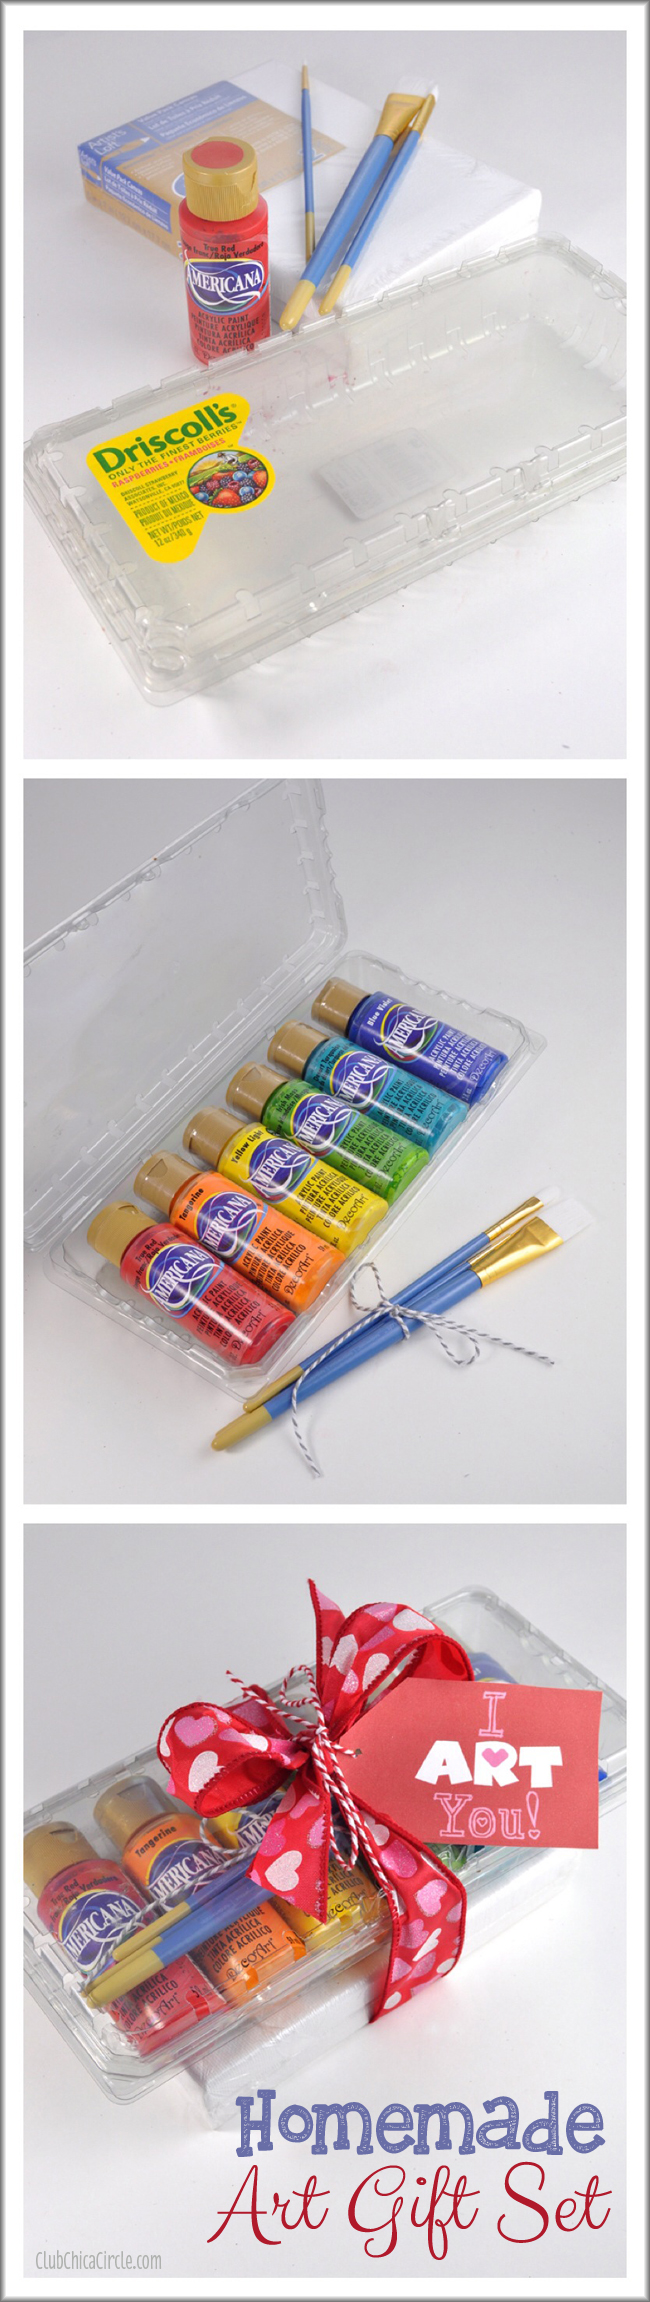 Make your own homemade art gift set for tweens